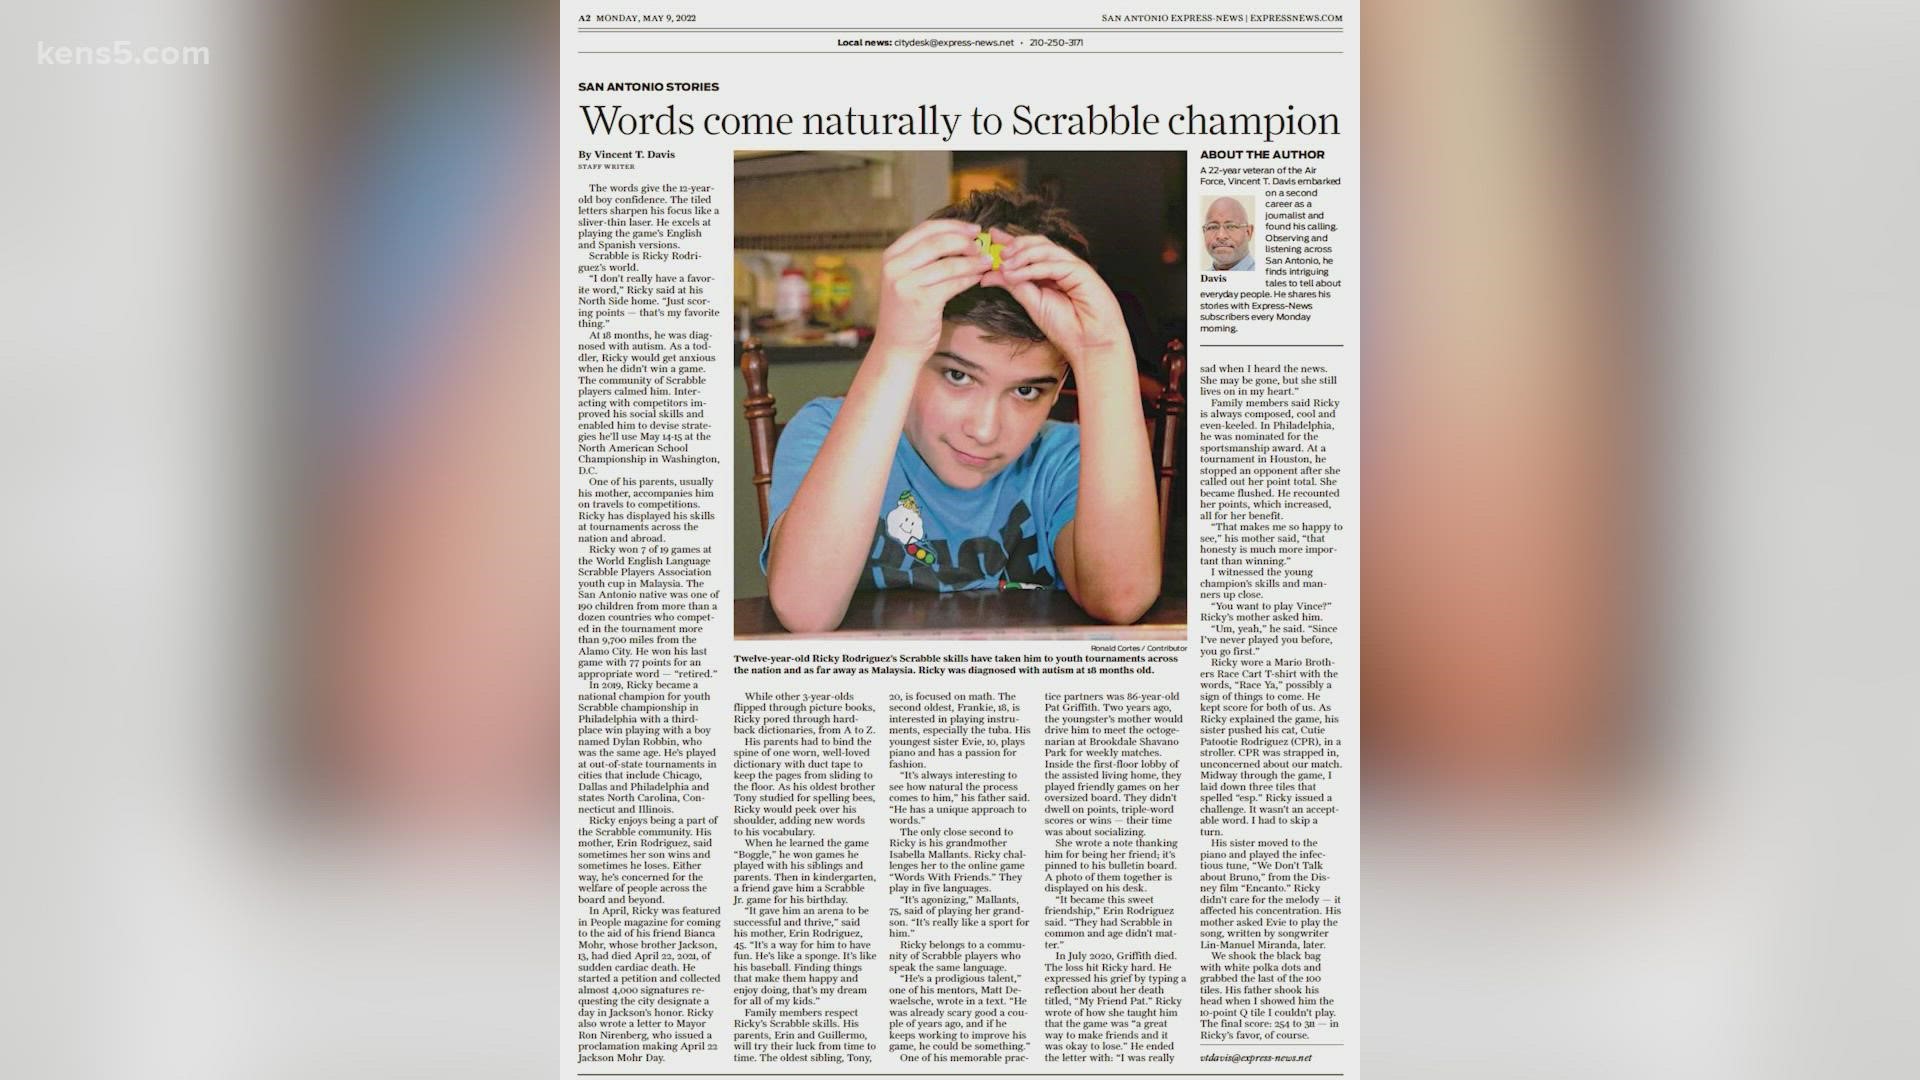 Ricky Rodriguez, who is only 12, leaves for Washington DC to compete in the North American School Scrabble Championship.